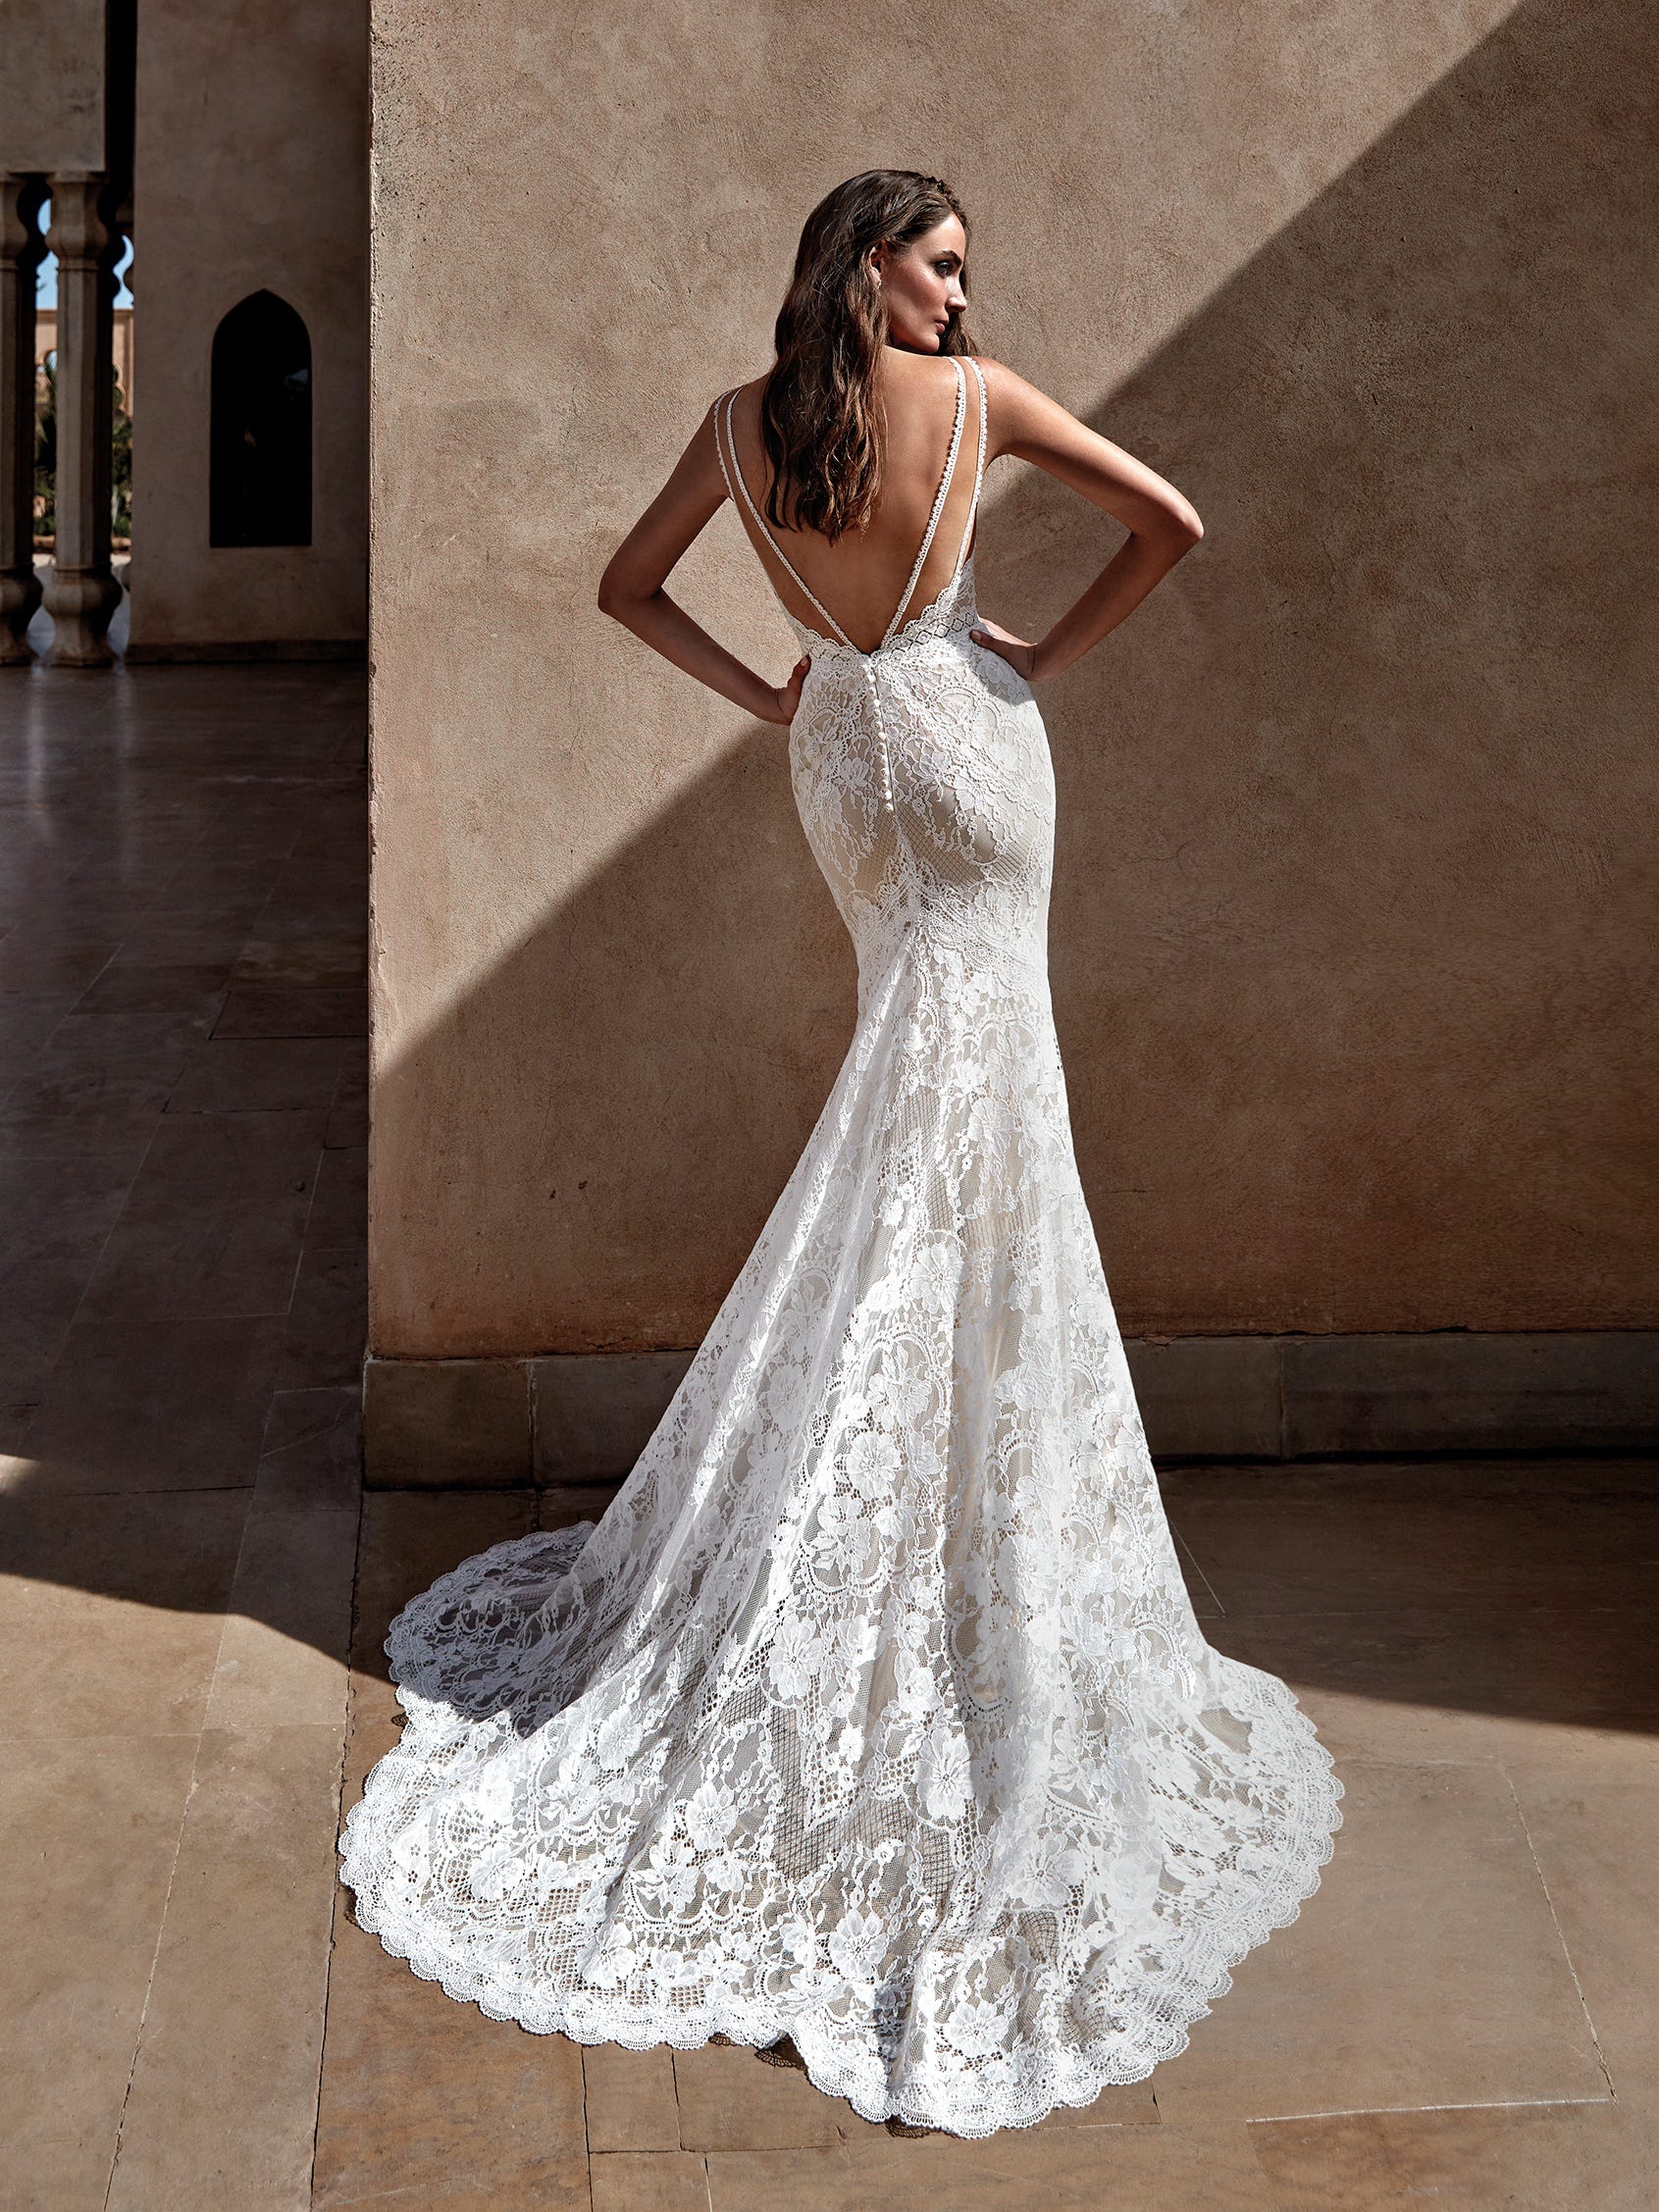 The Tattoo Lace Wedding Dress Trend: 5 Beautiful Lace Illusion Mermaid  Wedding Dresses by Pronovias Barcelona Bridal - Fashionably Yours Bridal &  Formal Wear